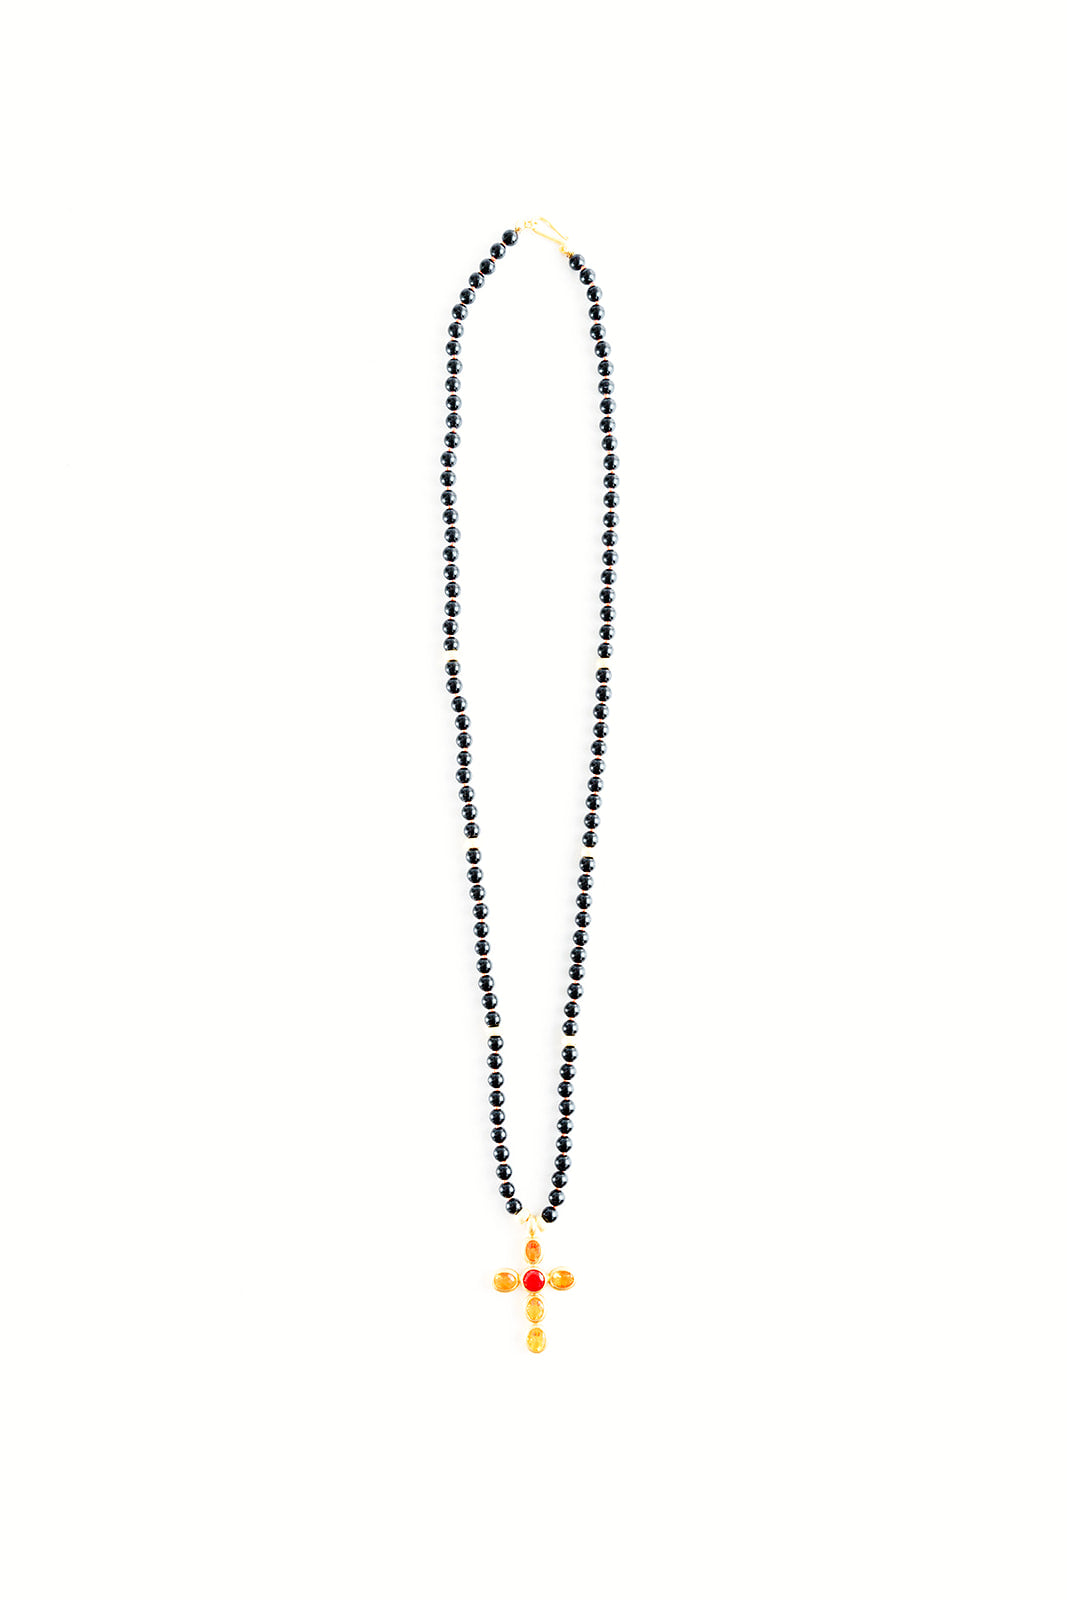 30" Black Onyx Necklace with 22K Yellow Gold Faceted Orange and Yellow and Blood Orange Fire Opal Cross